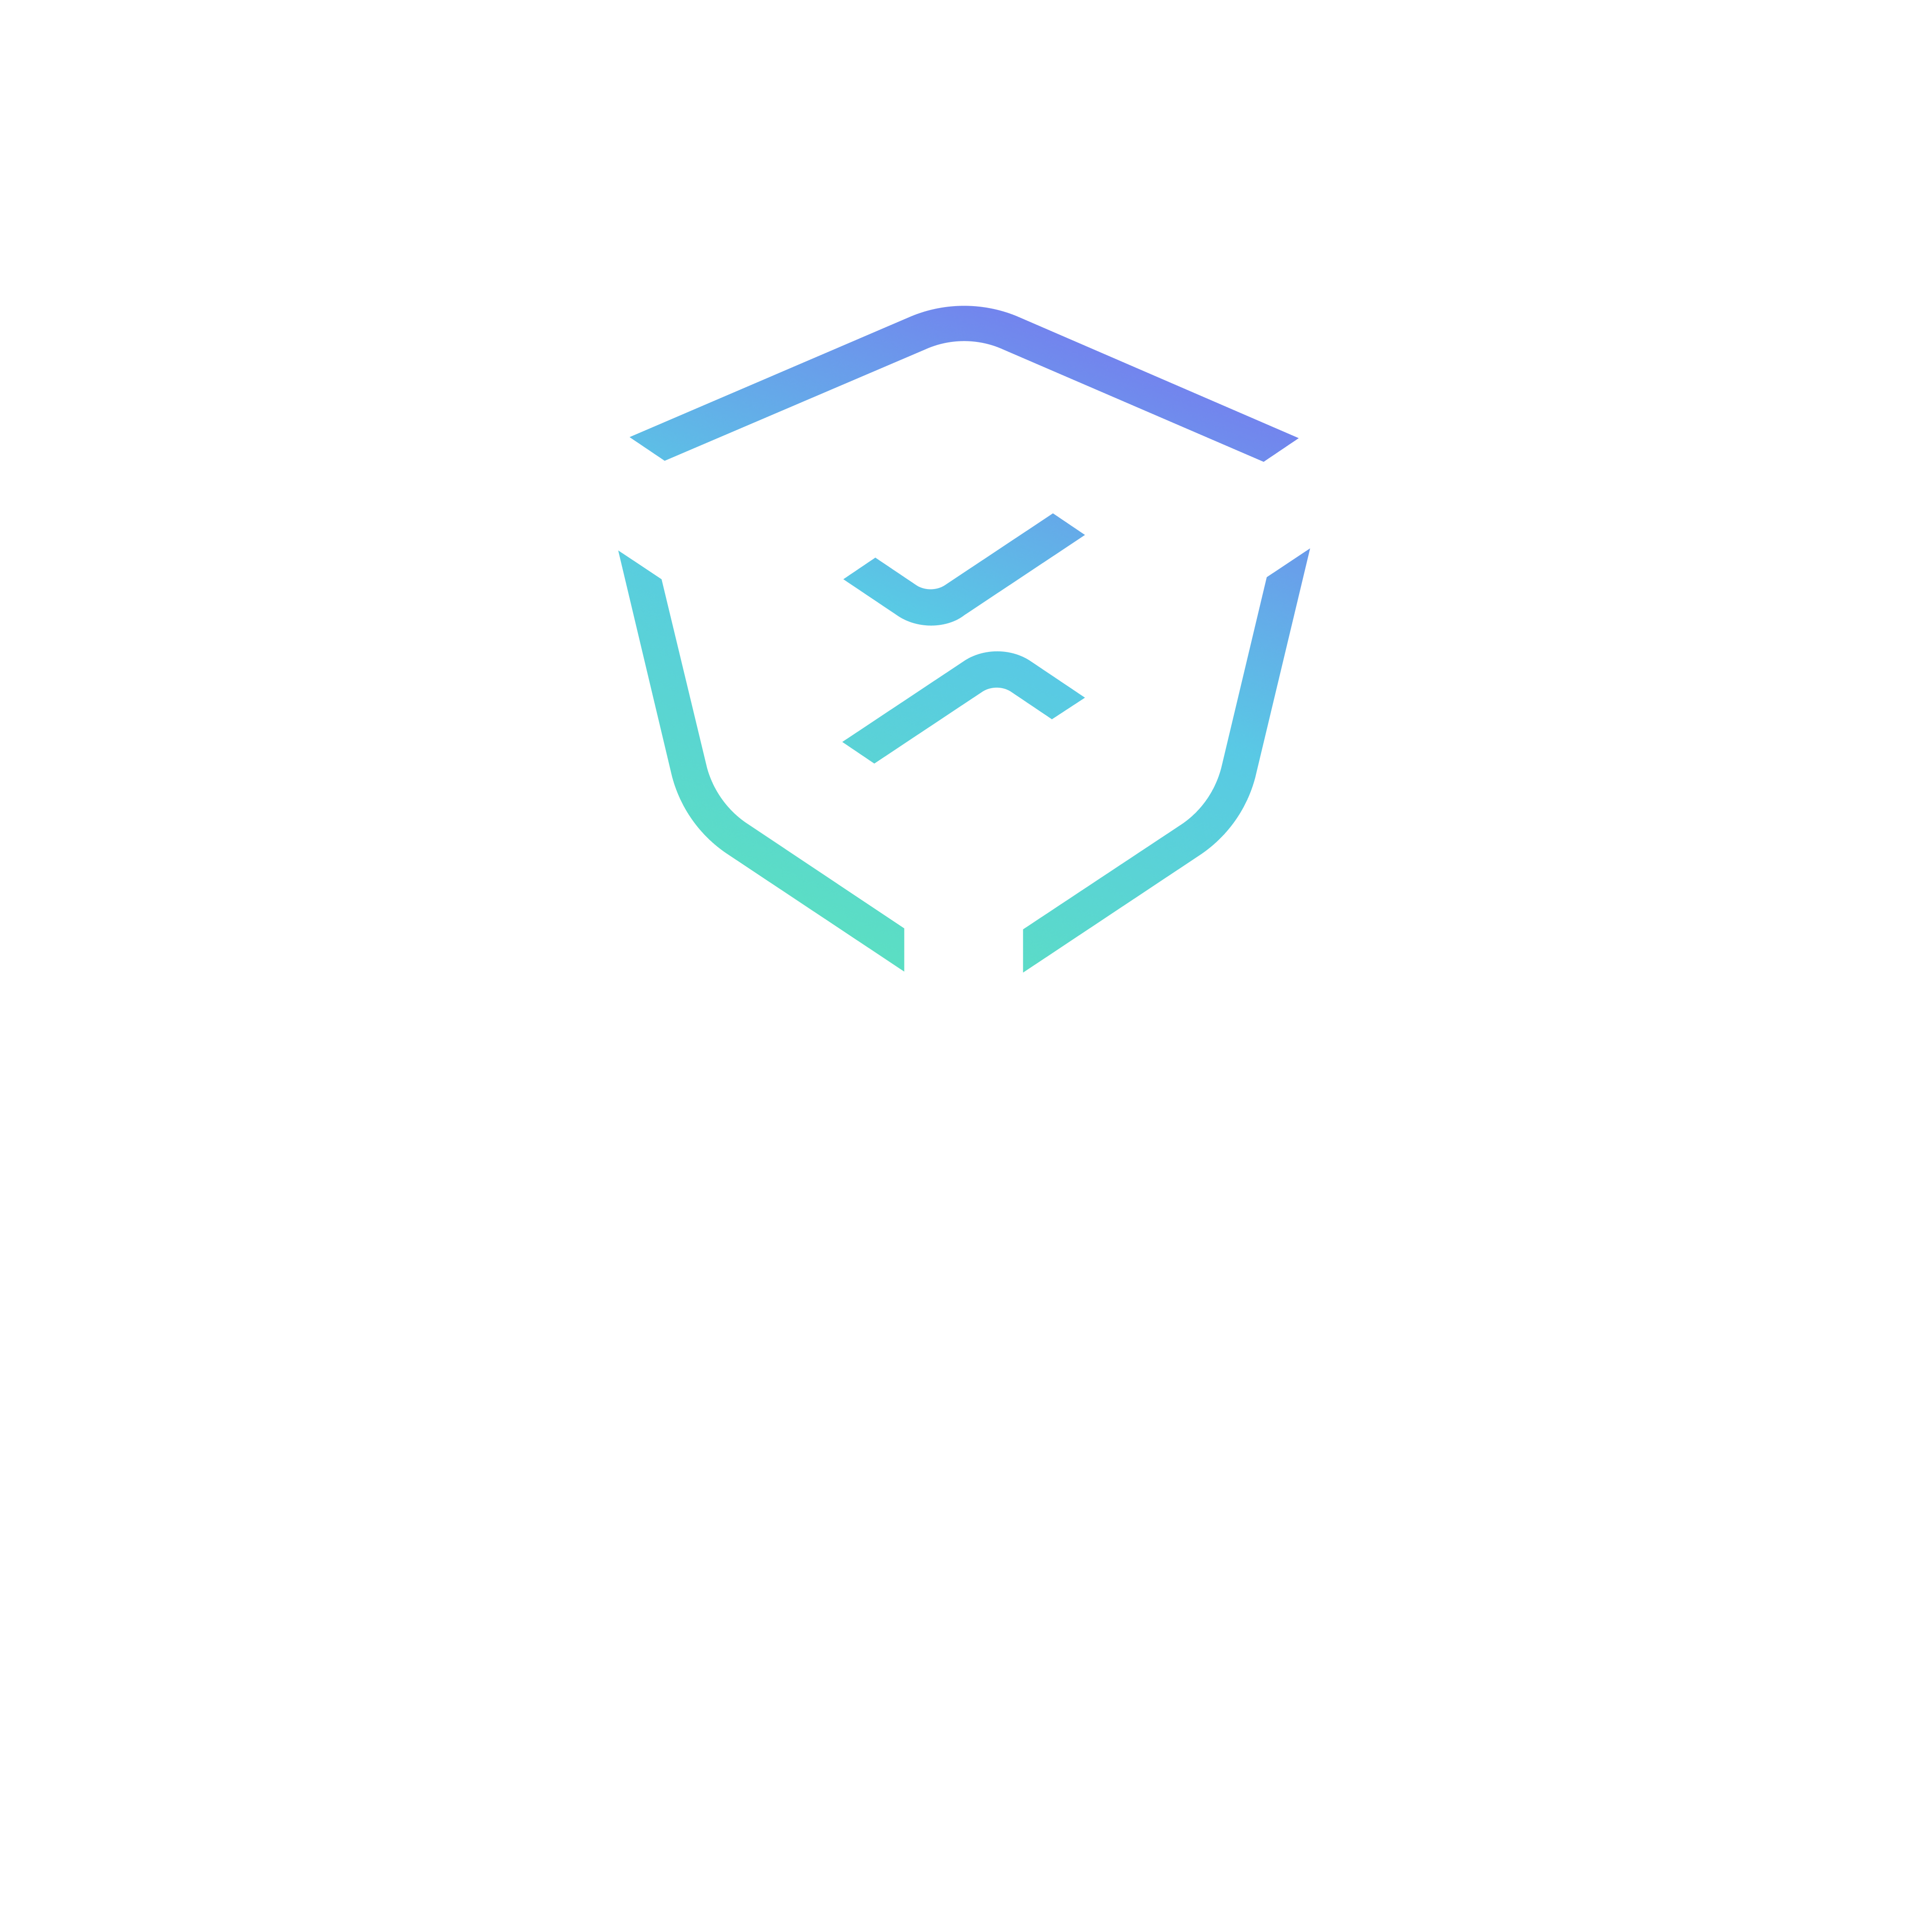 Learn how to earn with the NATIX Drive& app